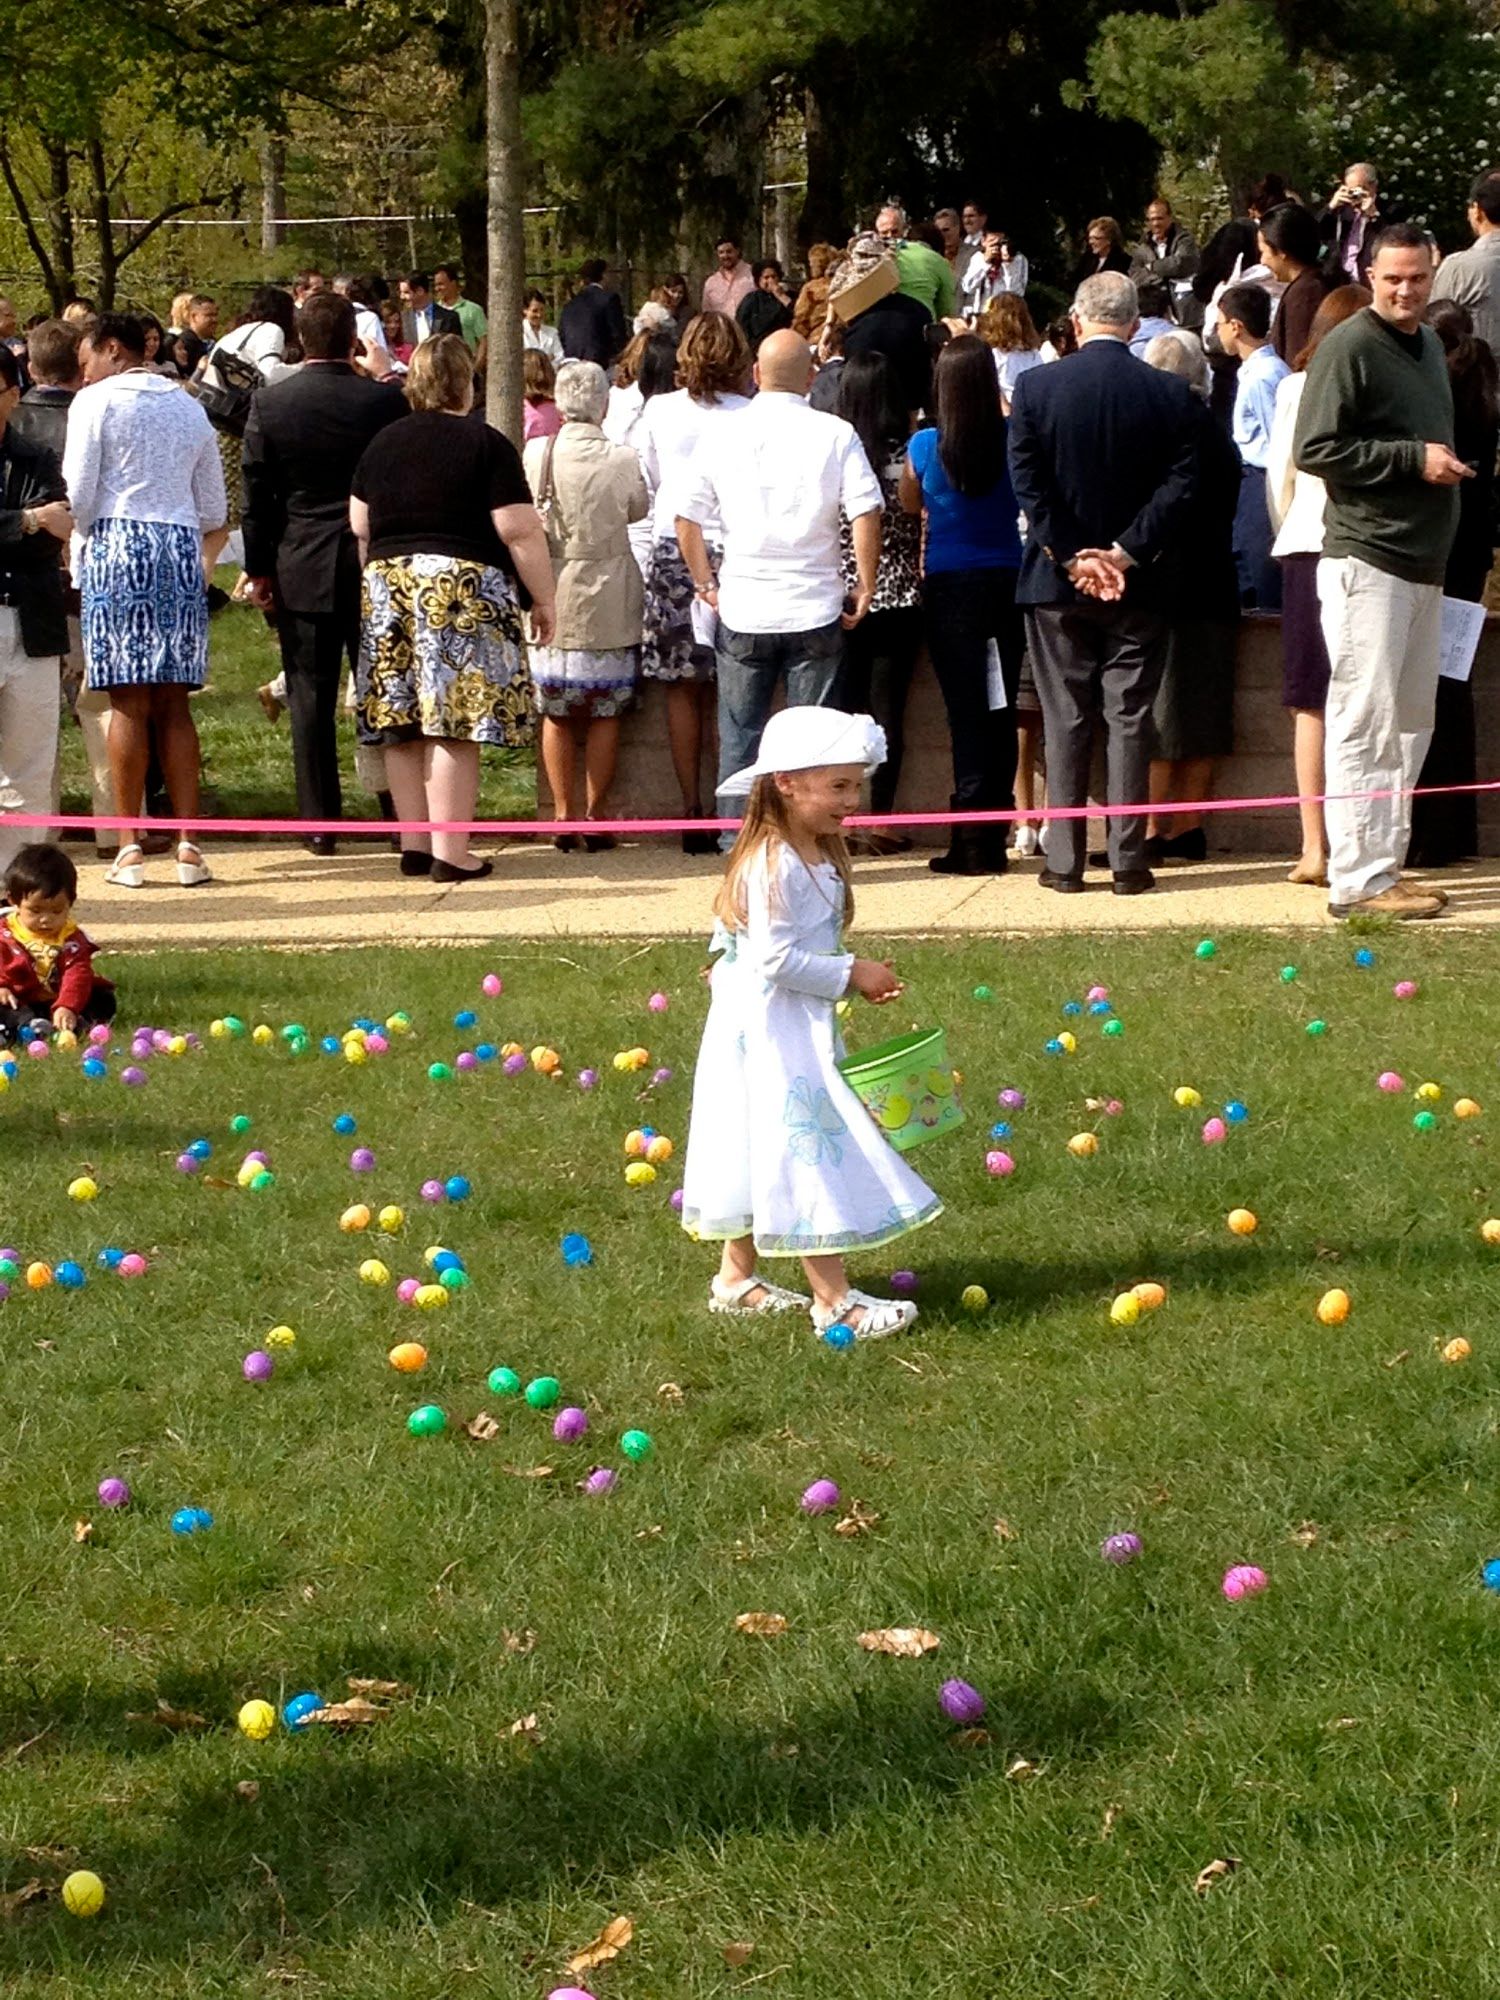  Buggy collecting eggs at our Church's annual Easter egg hunt after Easter mass. 